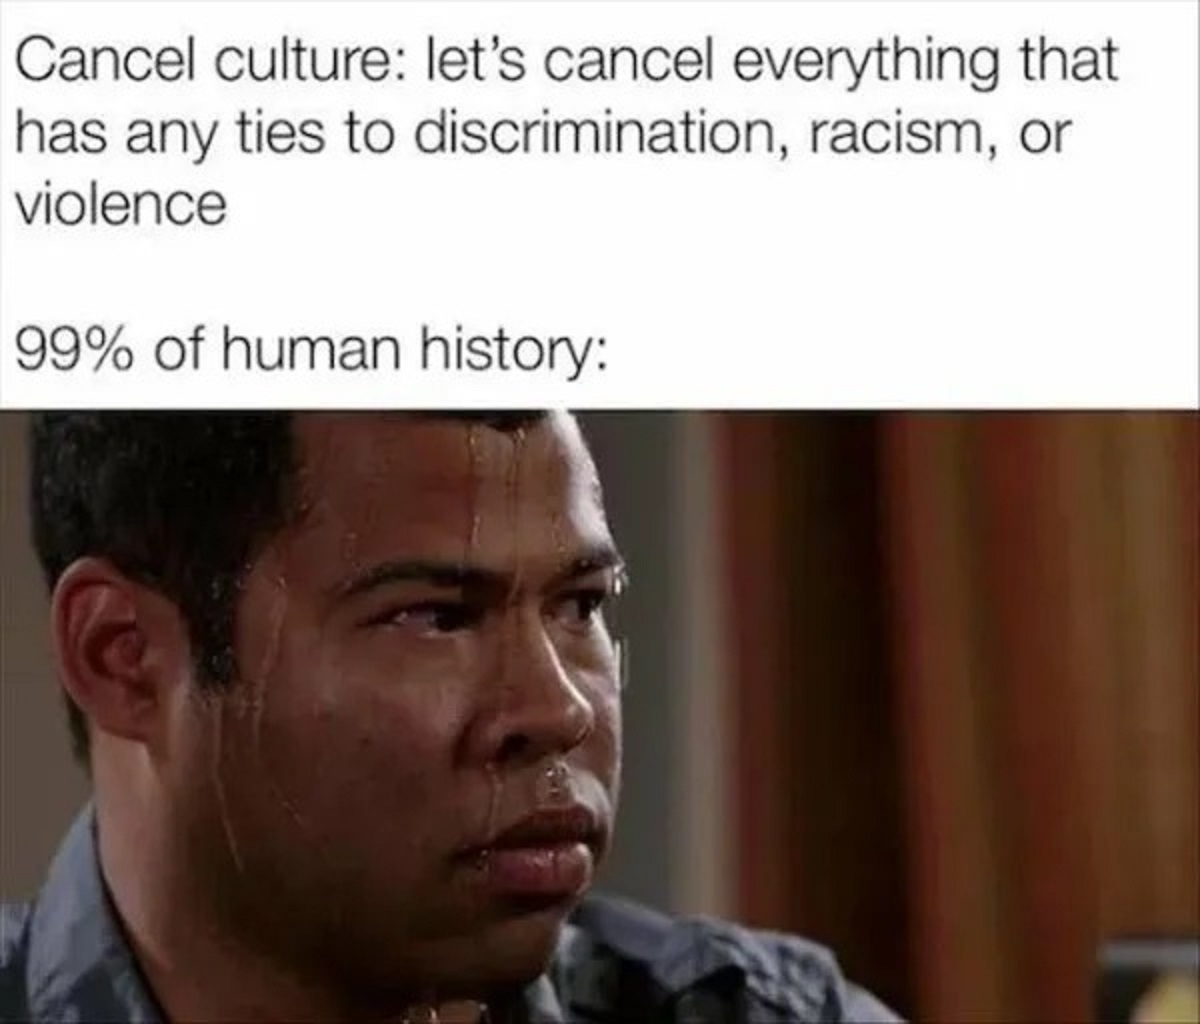 google docs memes - Cancel culture let's cancel everything that has any ties to discrimination, racism, or violence 99% of human history